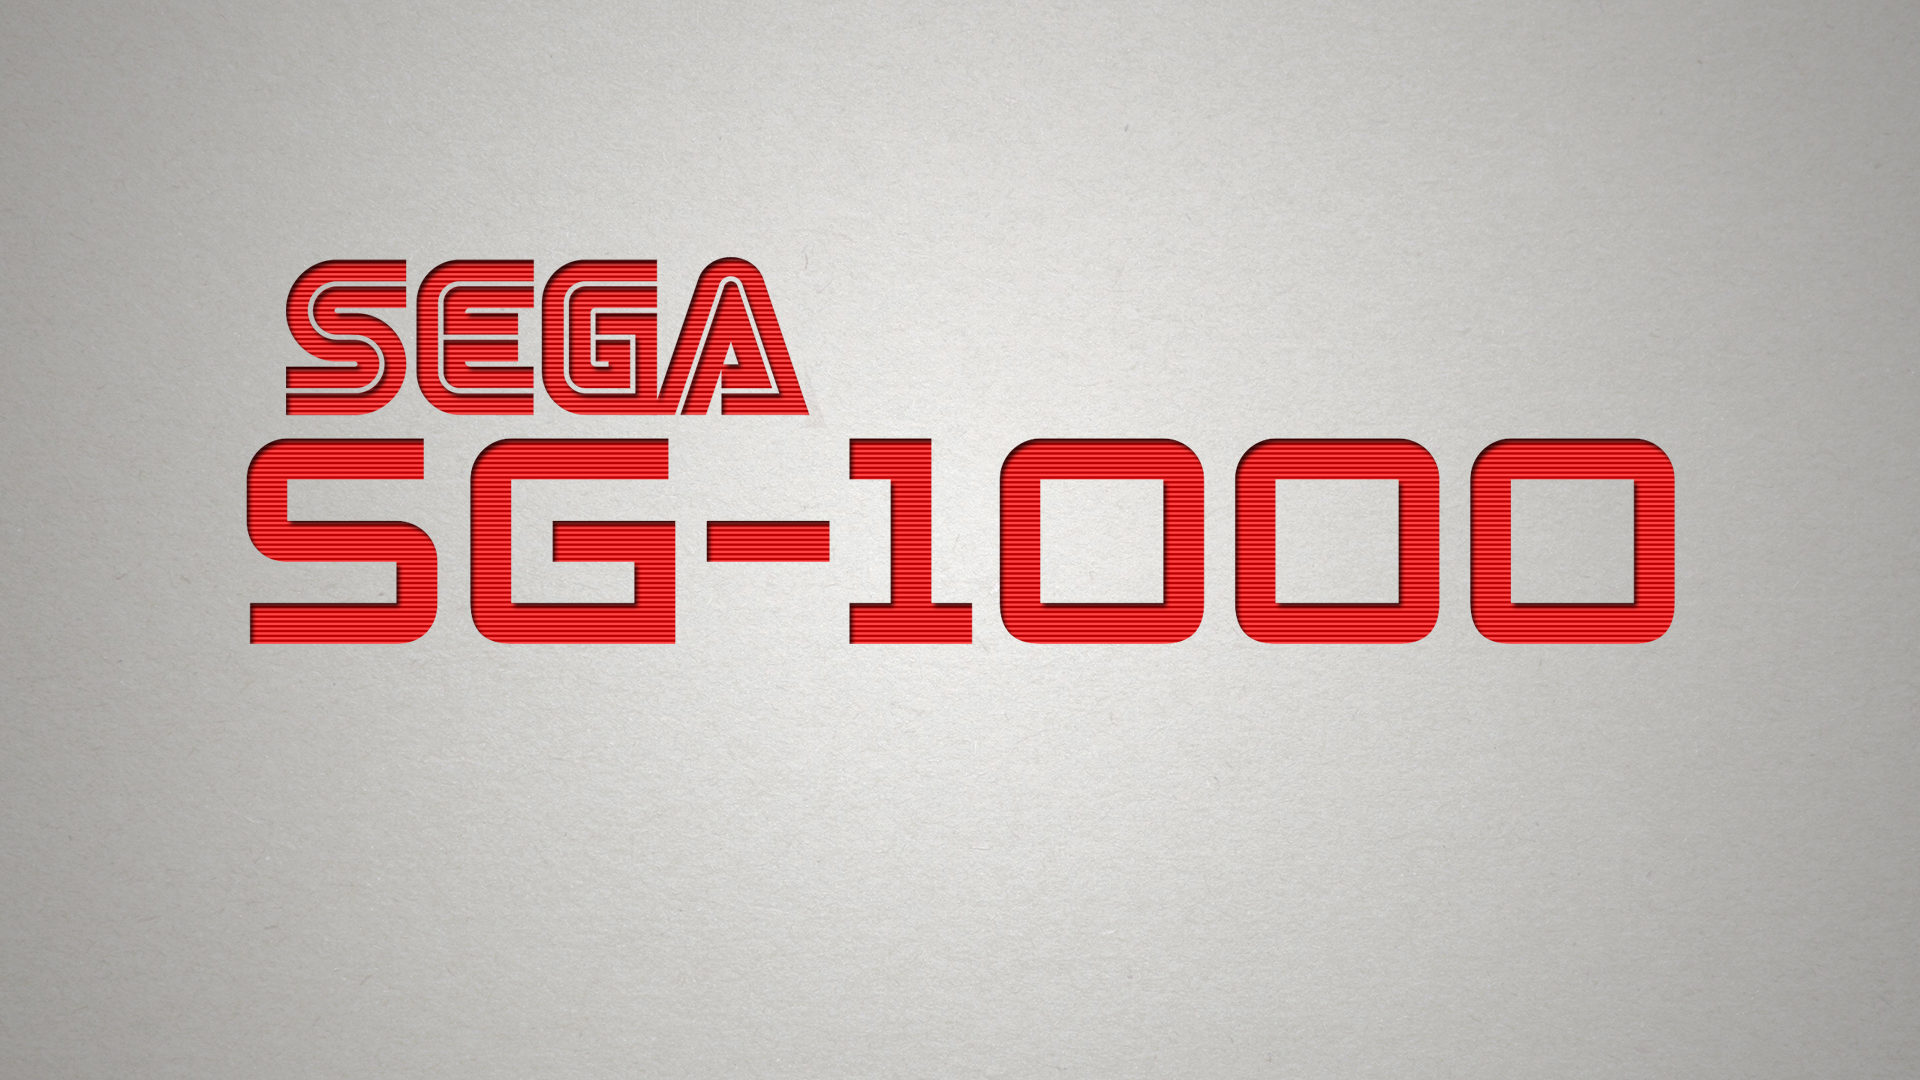 Video Game SG-1000 HD Wallpaper | Background Image